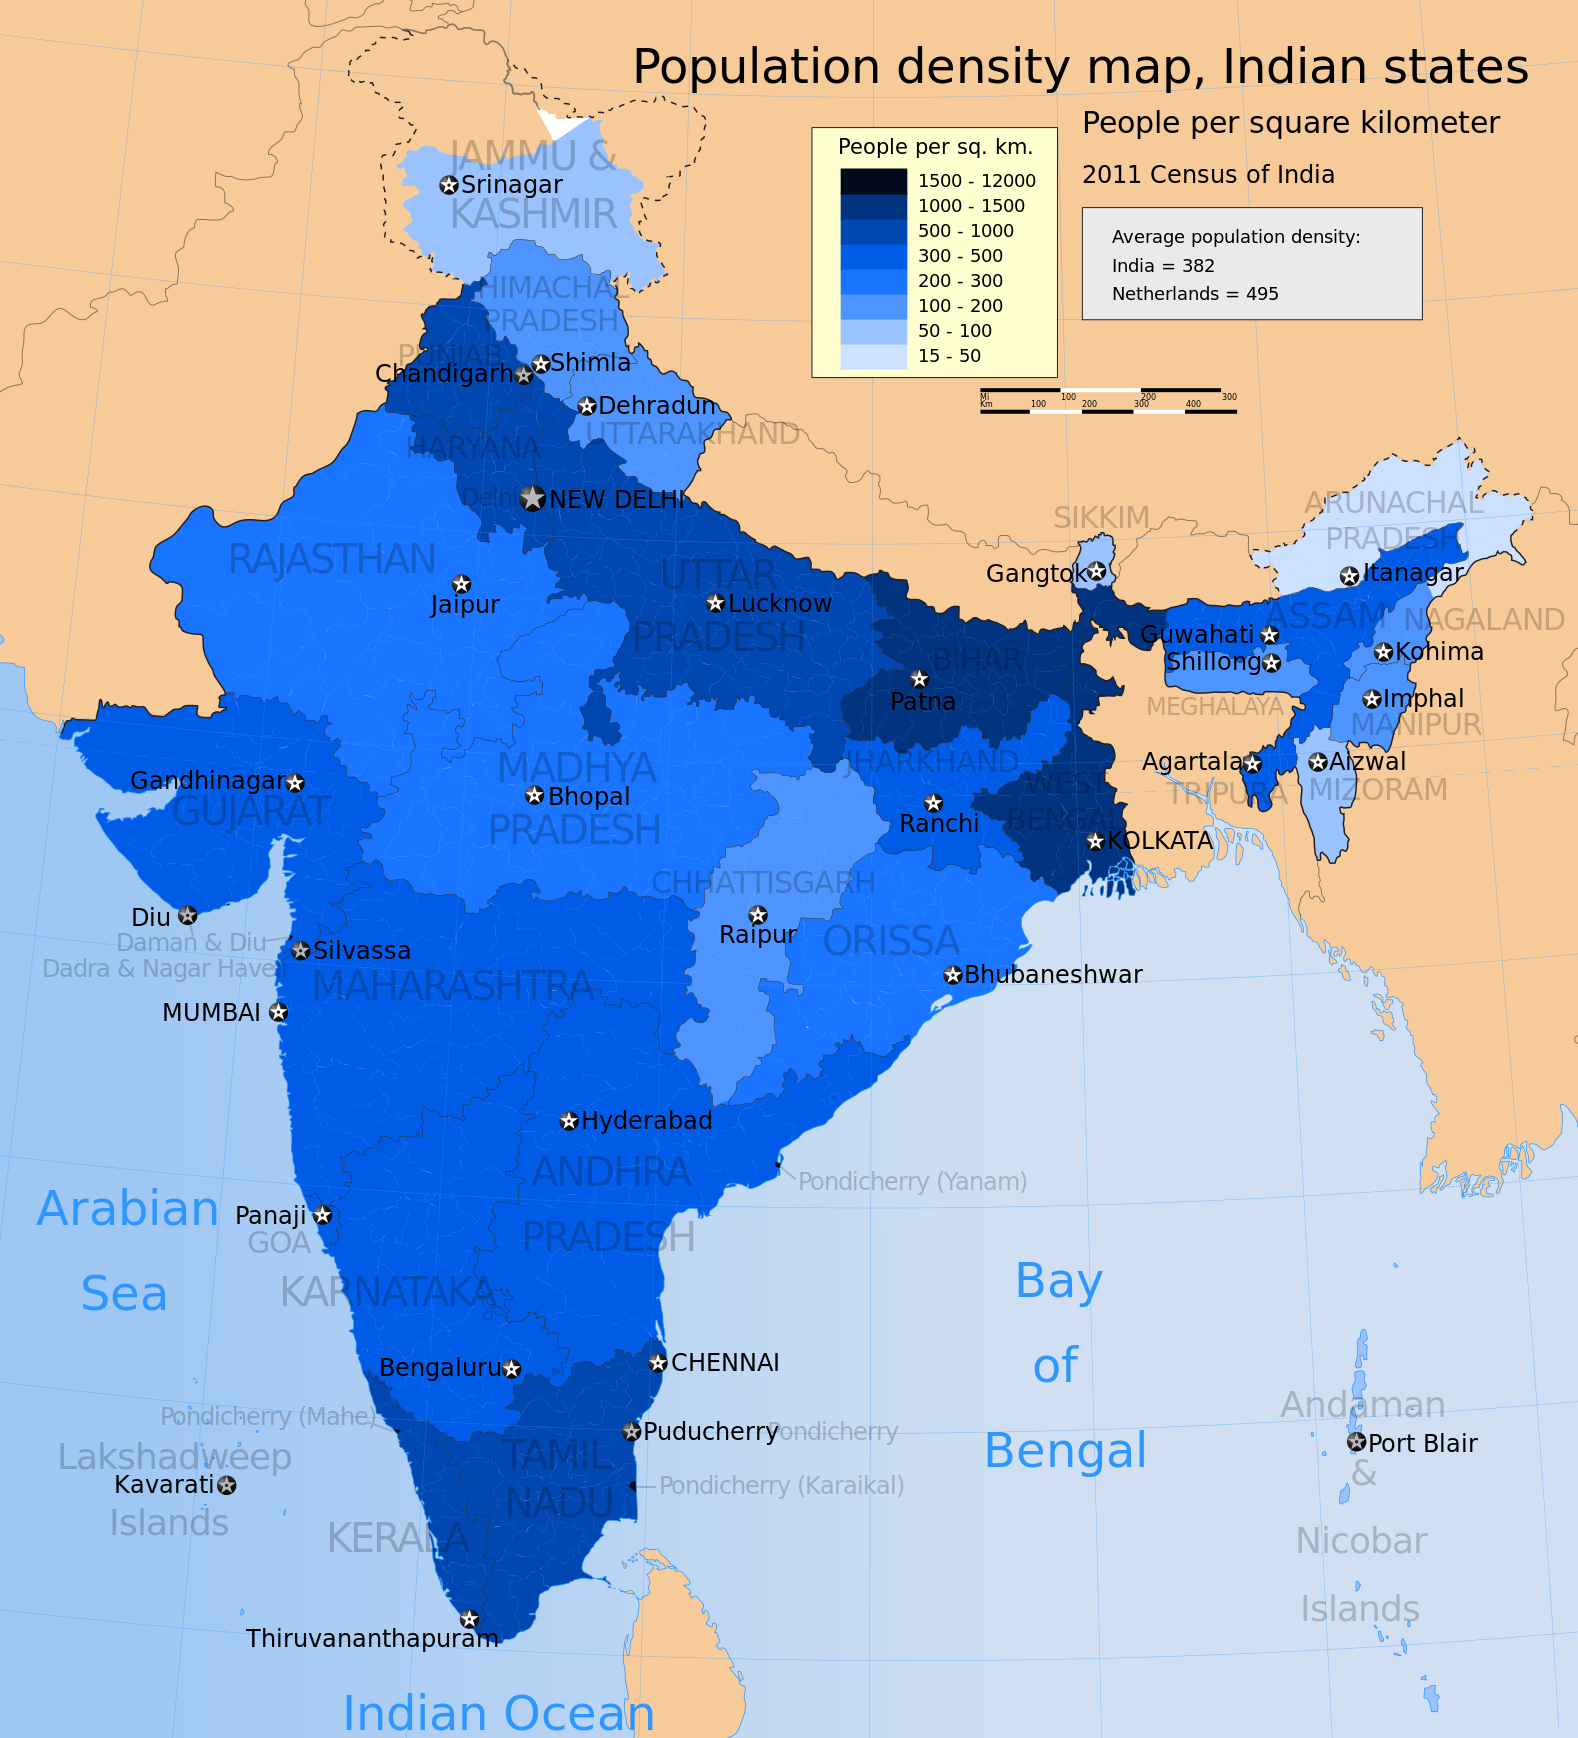 1578px-2011_Census_India_population_density_map%2C_states_and_union_territories.svg.png